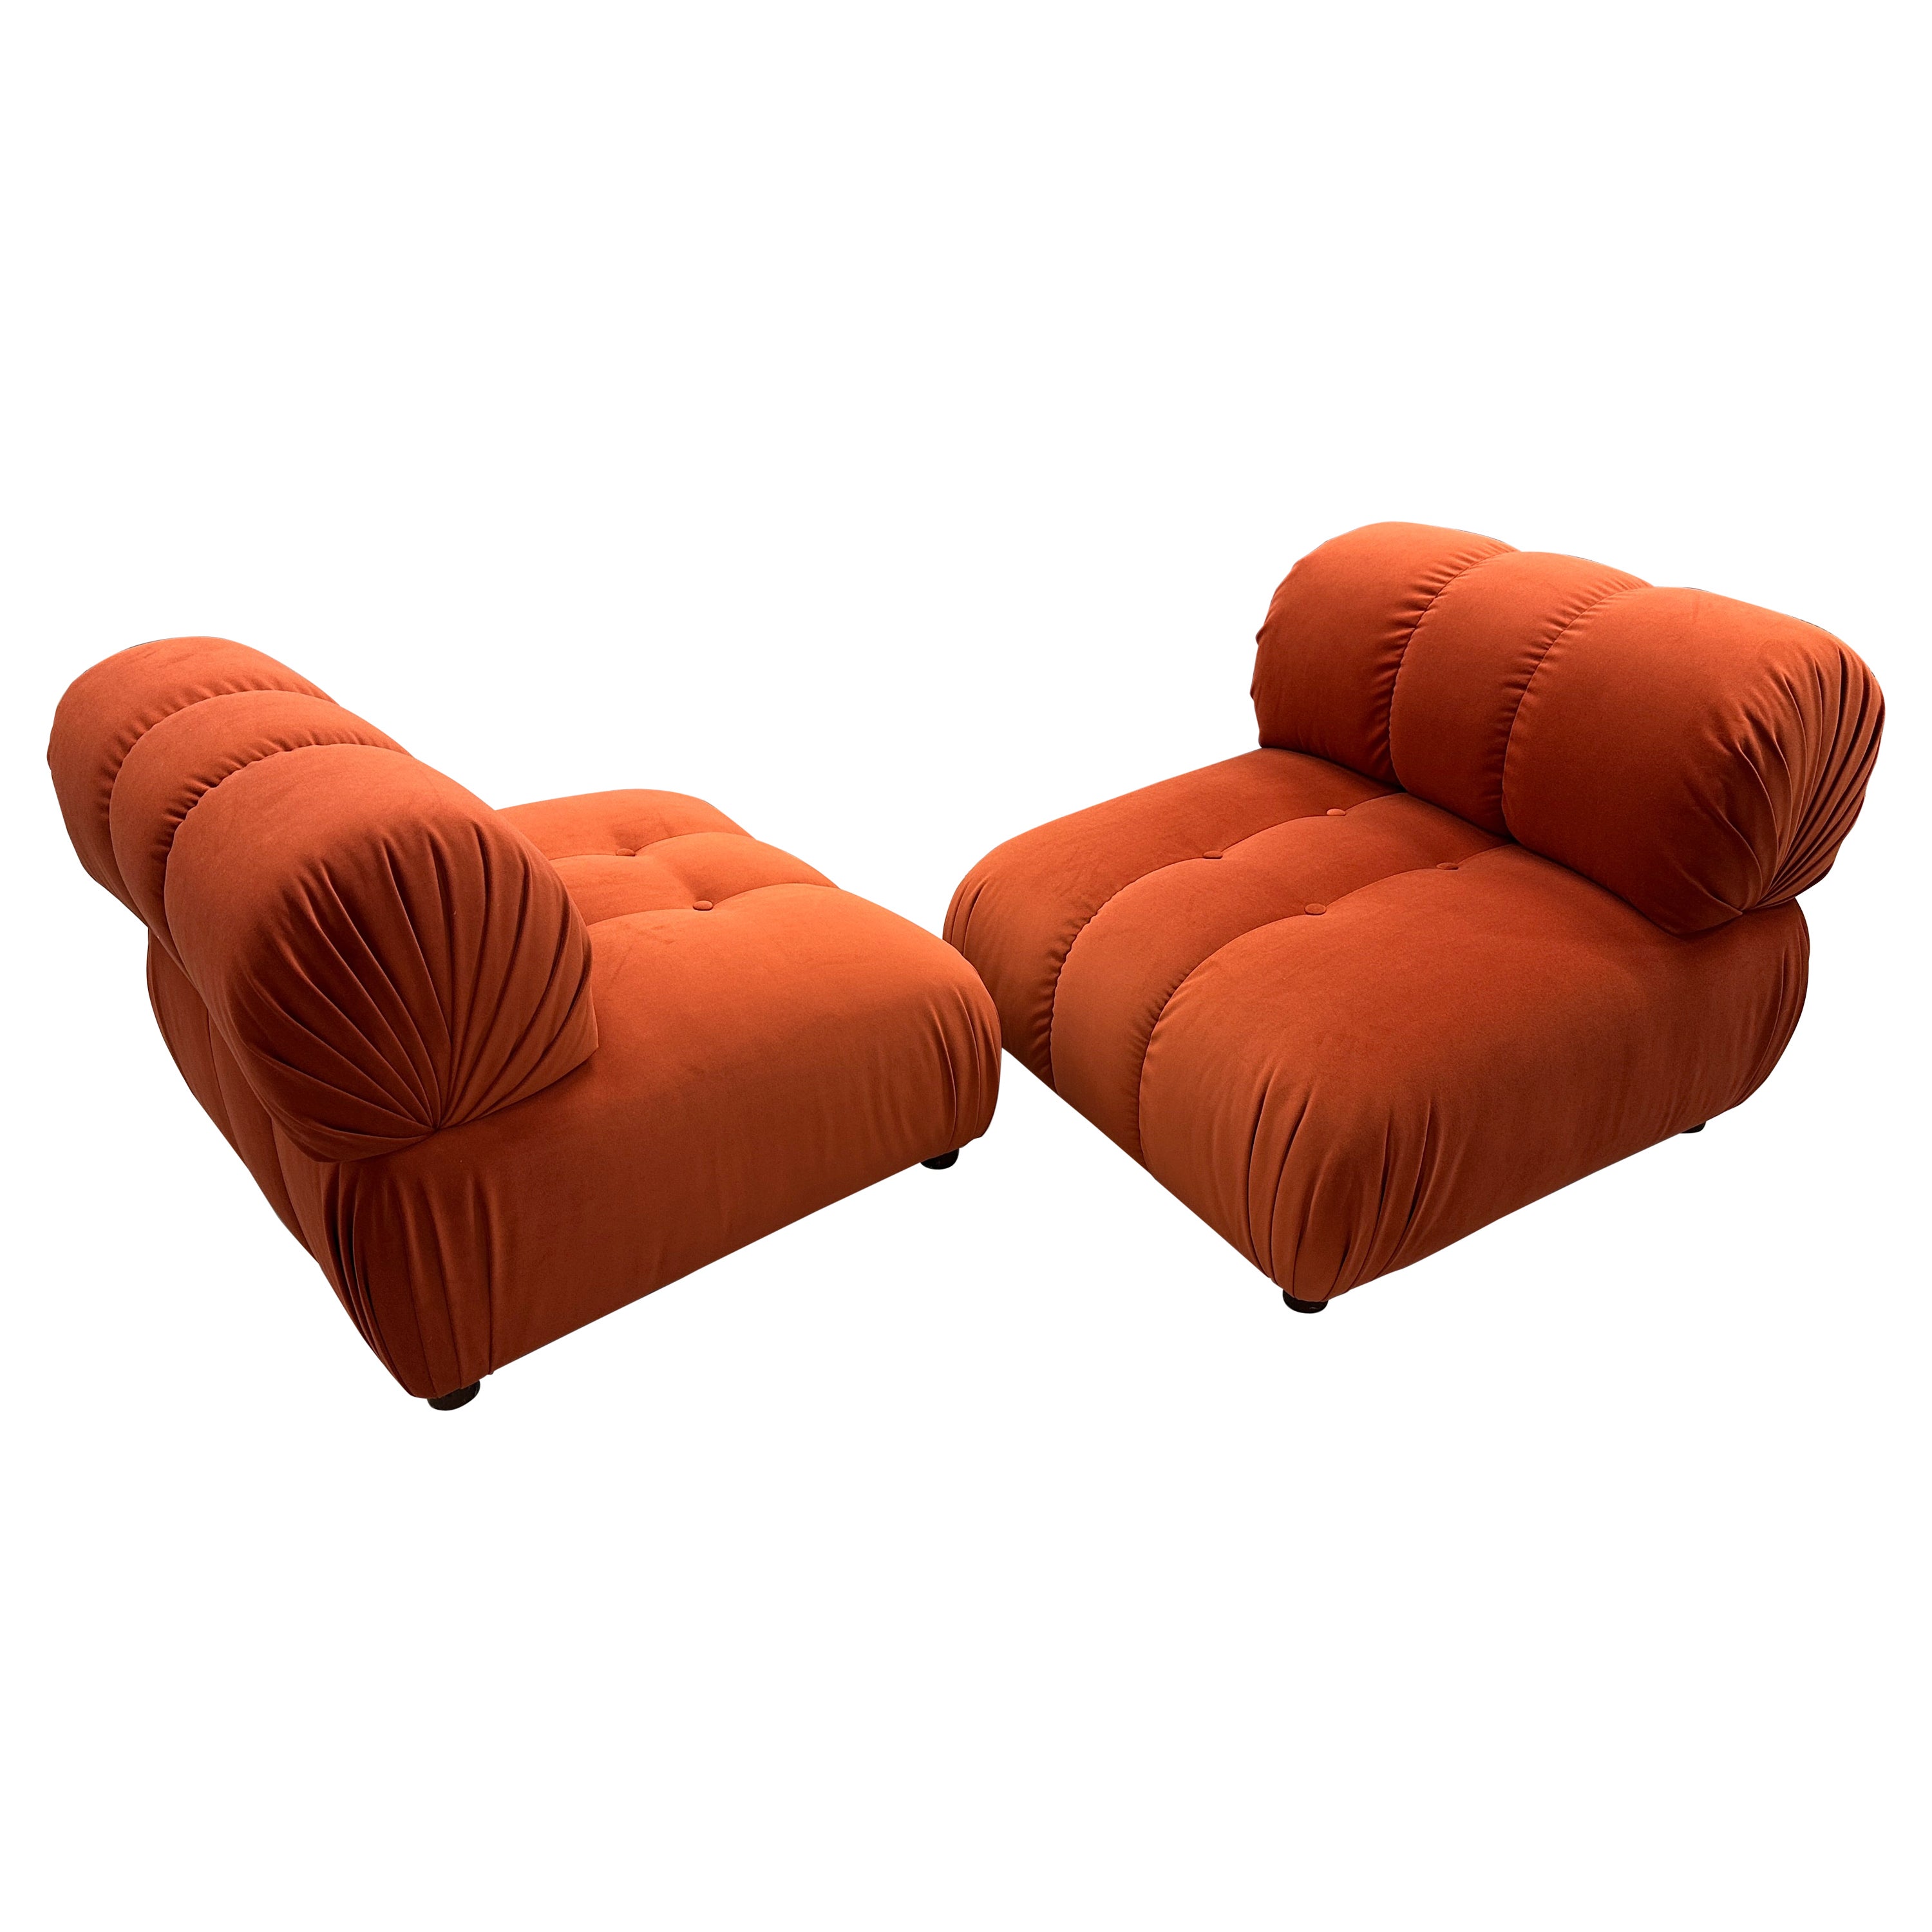 Pair of Reupholstered Orange Velvet Rouched and Tufted Chairs For Sale